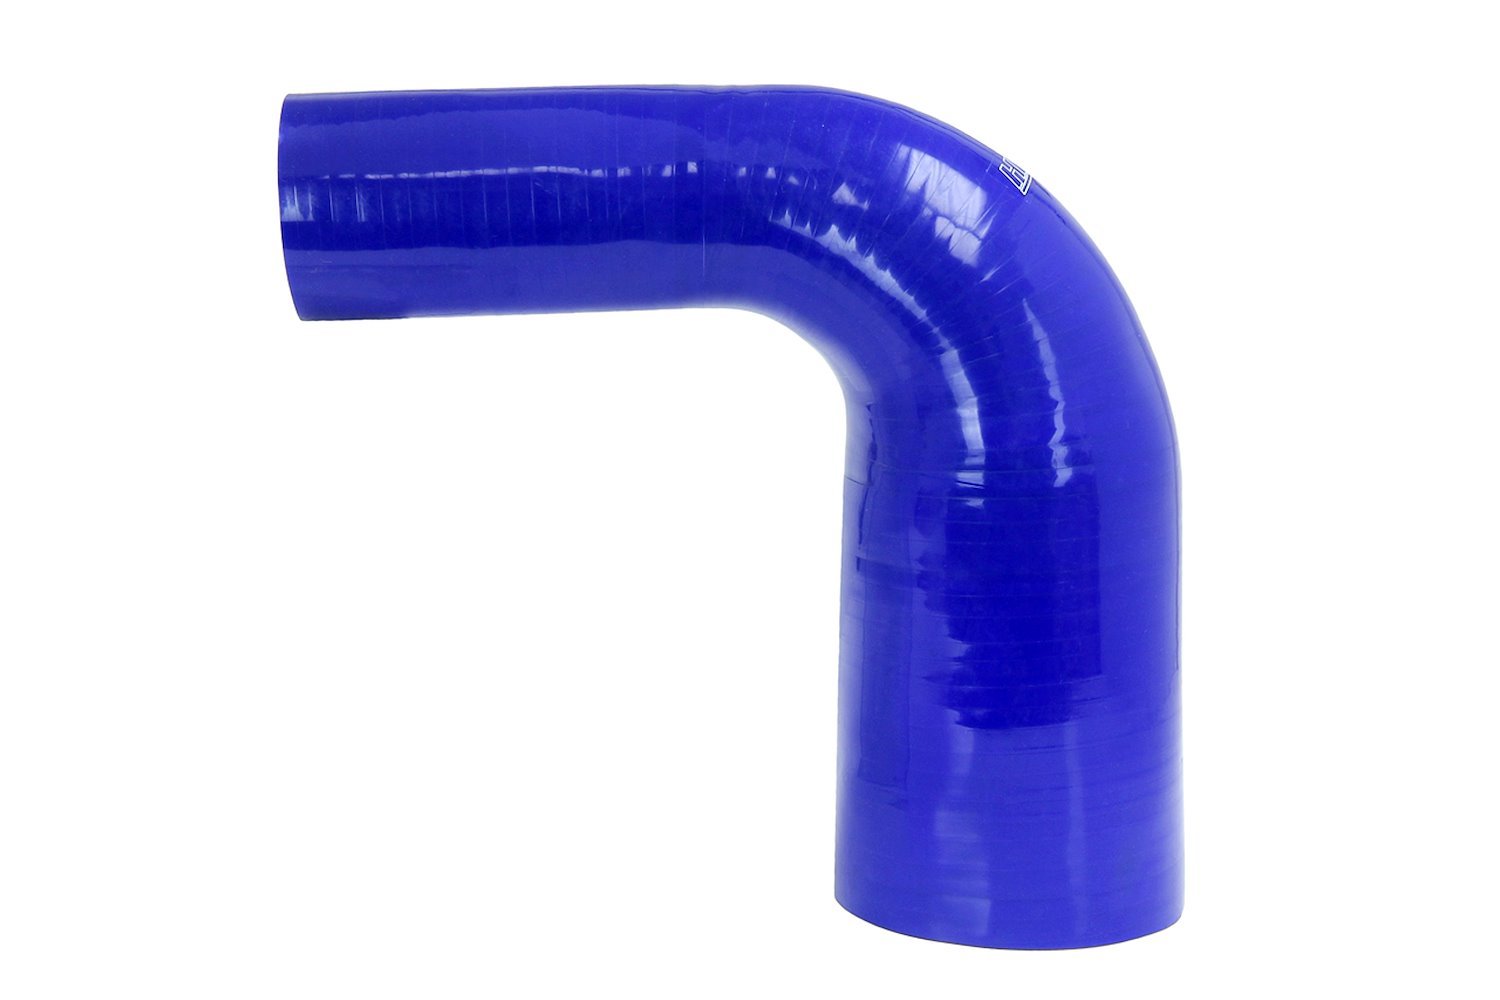 HTSER90-238-250-BLUE Silicone 90-Degree Elbow Hose, High-Temp 4-Ply Reinforced, 2-3/8 in. - 2-1/2 in. ID, Blue